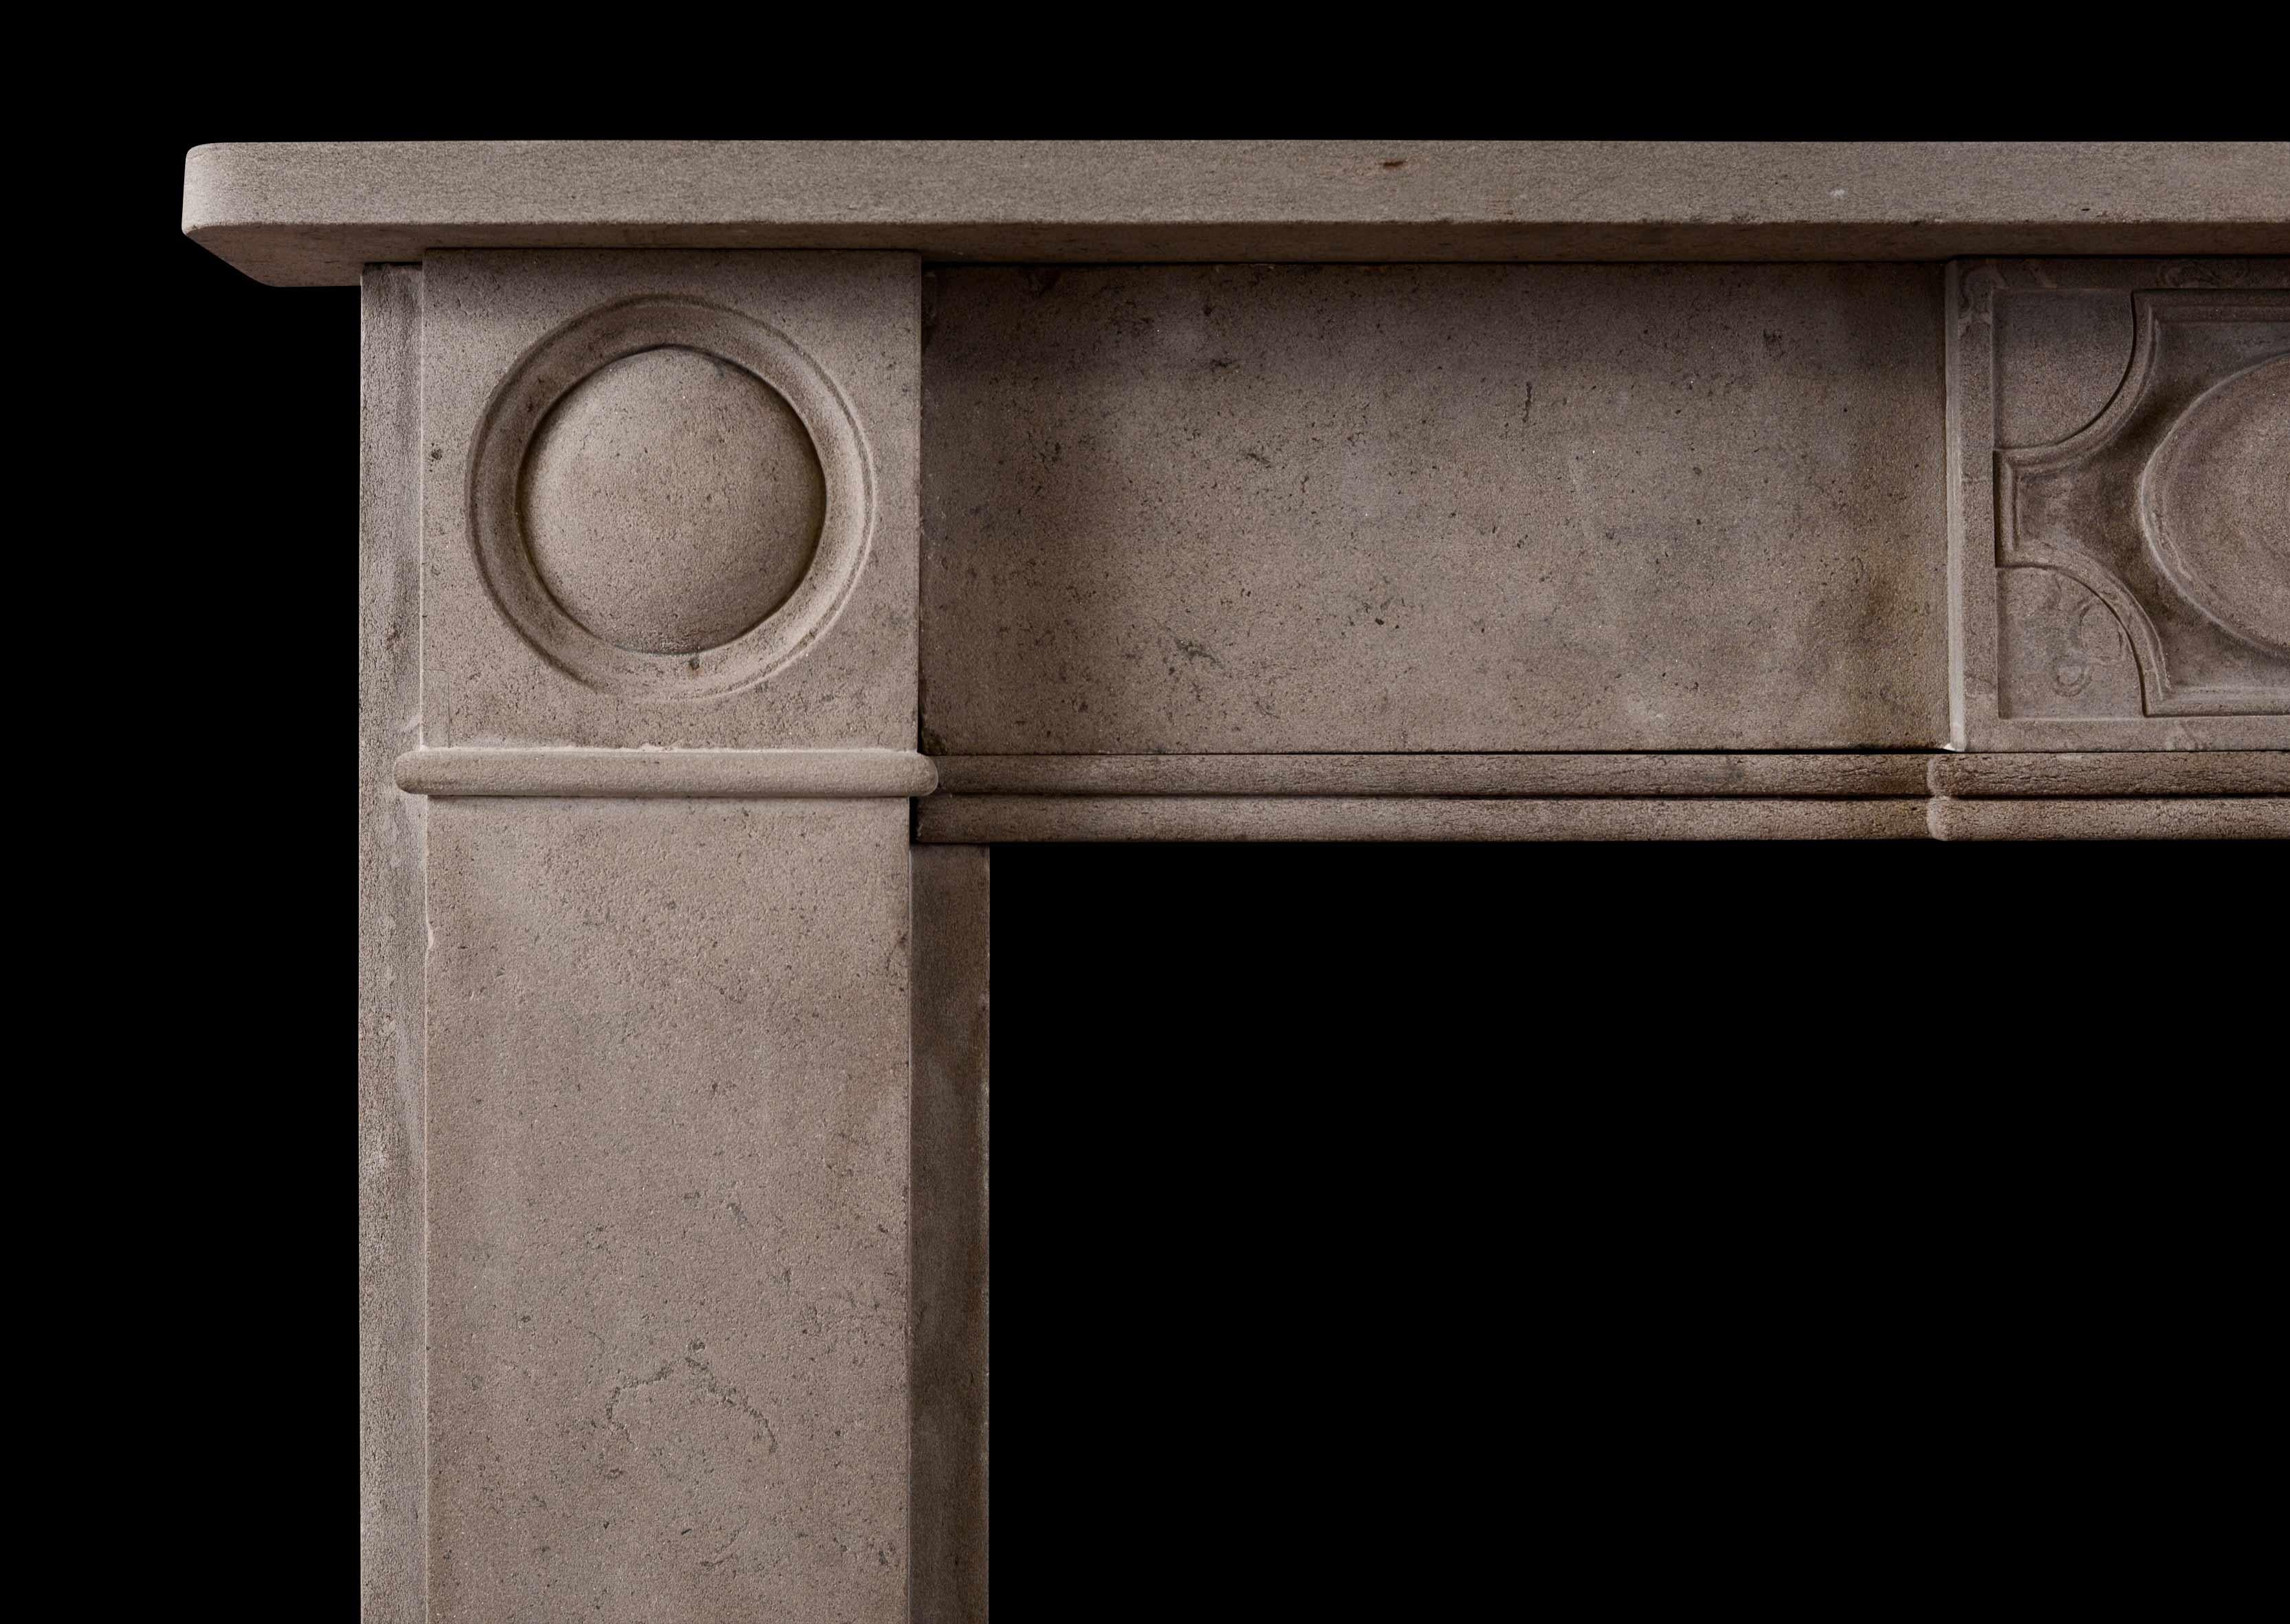 A Regency style antique fireplace in Purbeck stone. The flat jambs surmounted by roundel paterae, the frieze with carved centre block. Plain shelf above, English, 19th century.

Measures: Shelf width - 1334 mm 52 ½ in
Overall height 1162 mm 45 ¾